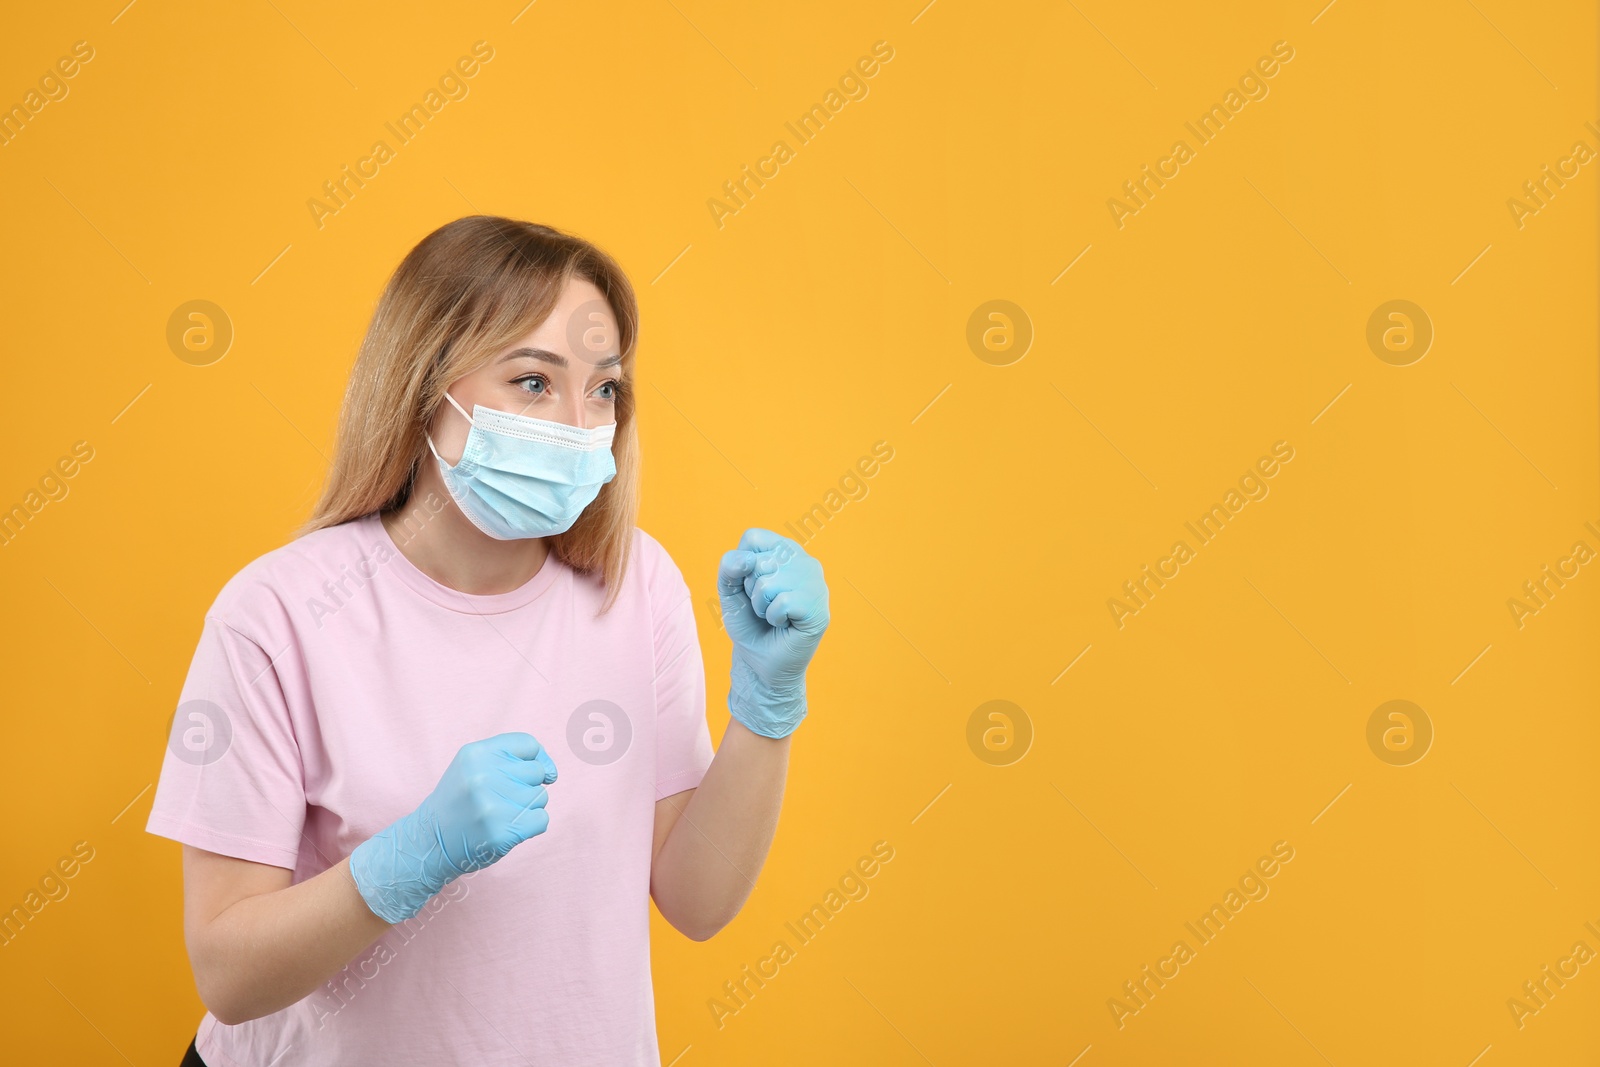 Photo of Woman with protective mask and gloves in fighting pose on yellow background. Strong immunity concept